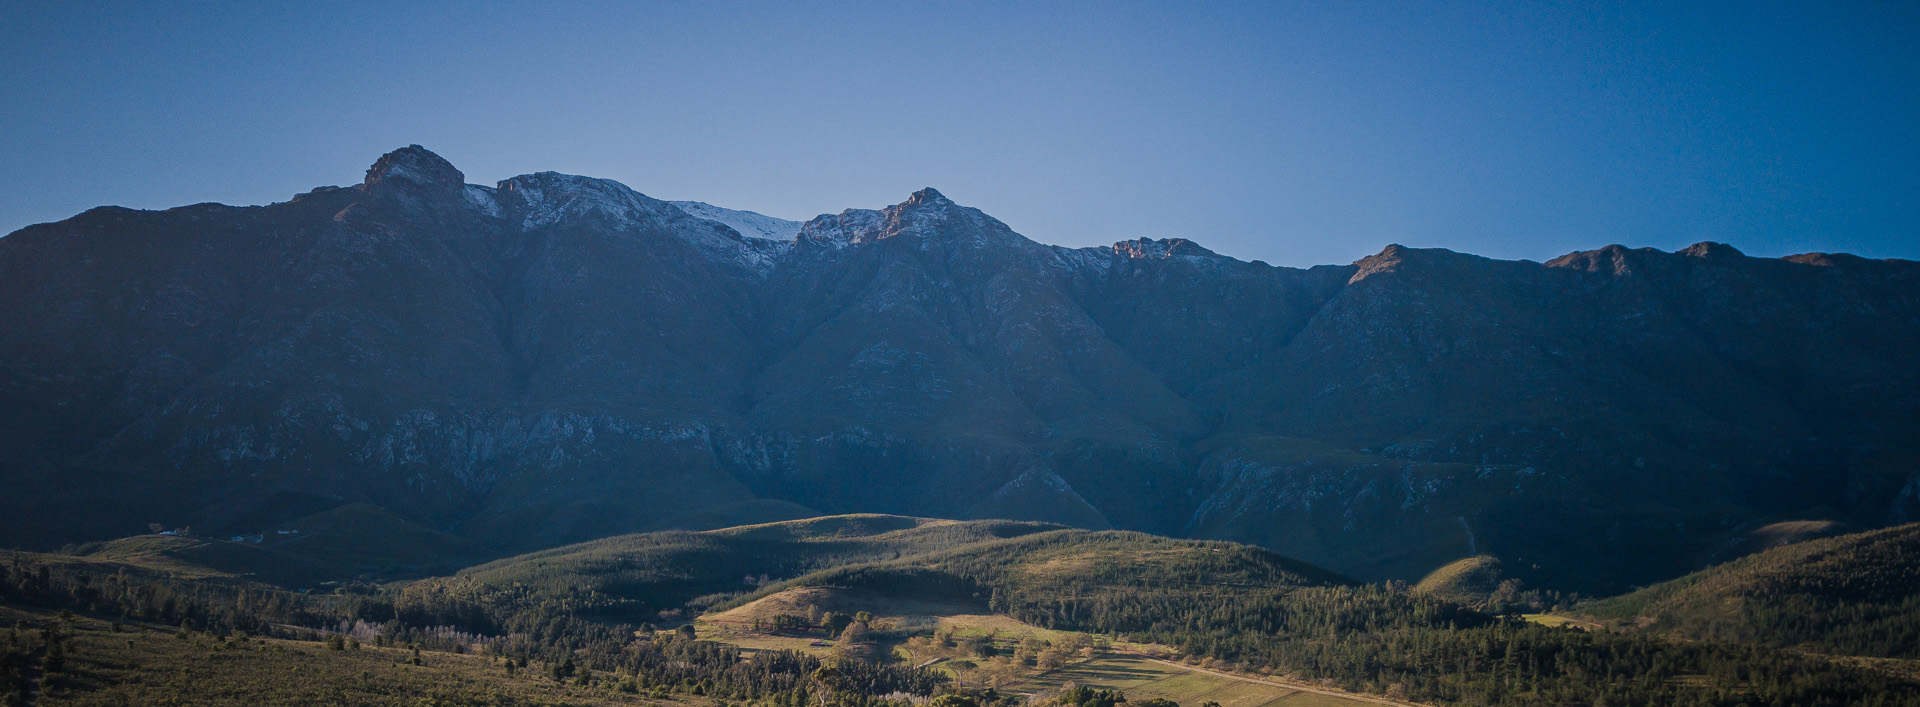 Image of the Langeberg Mountains from Swellendam